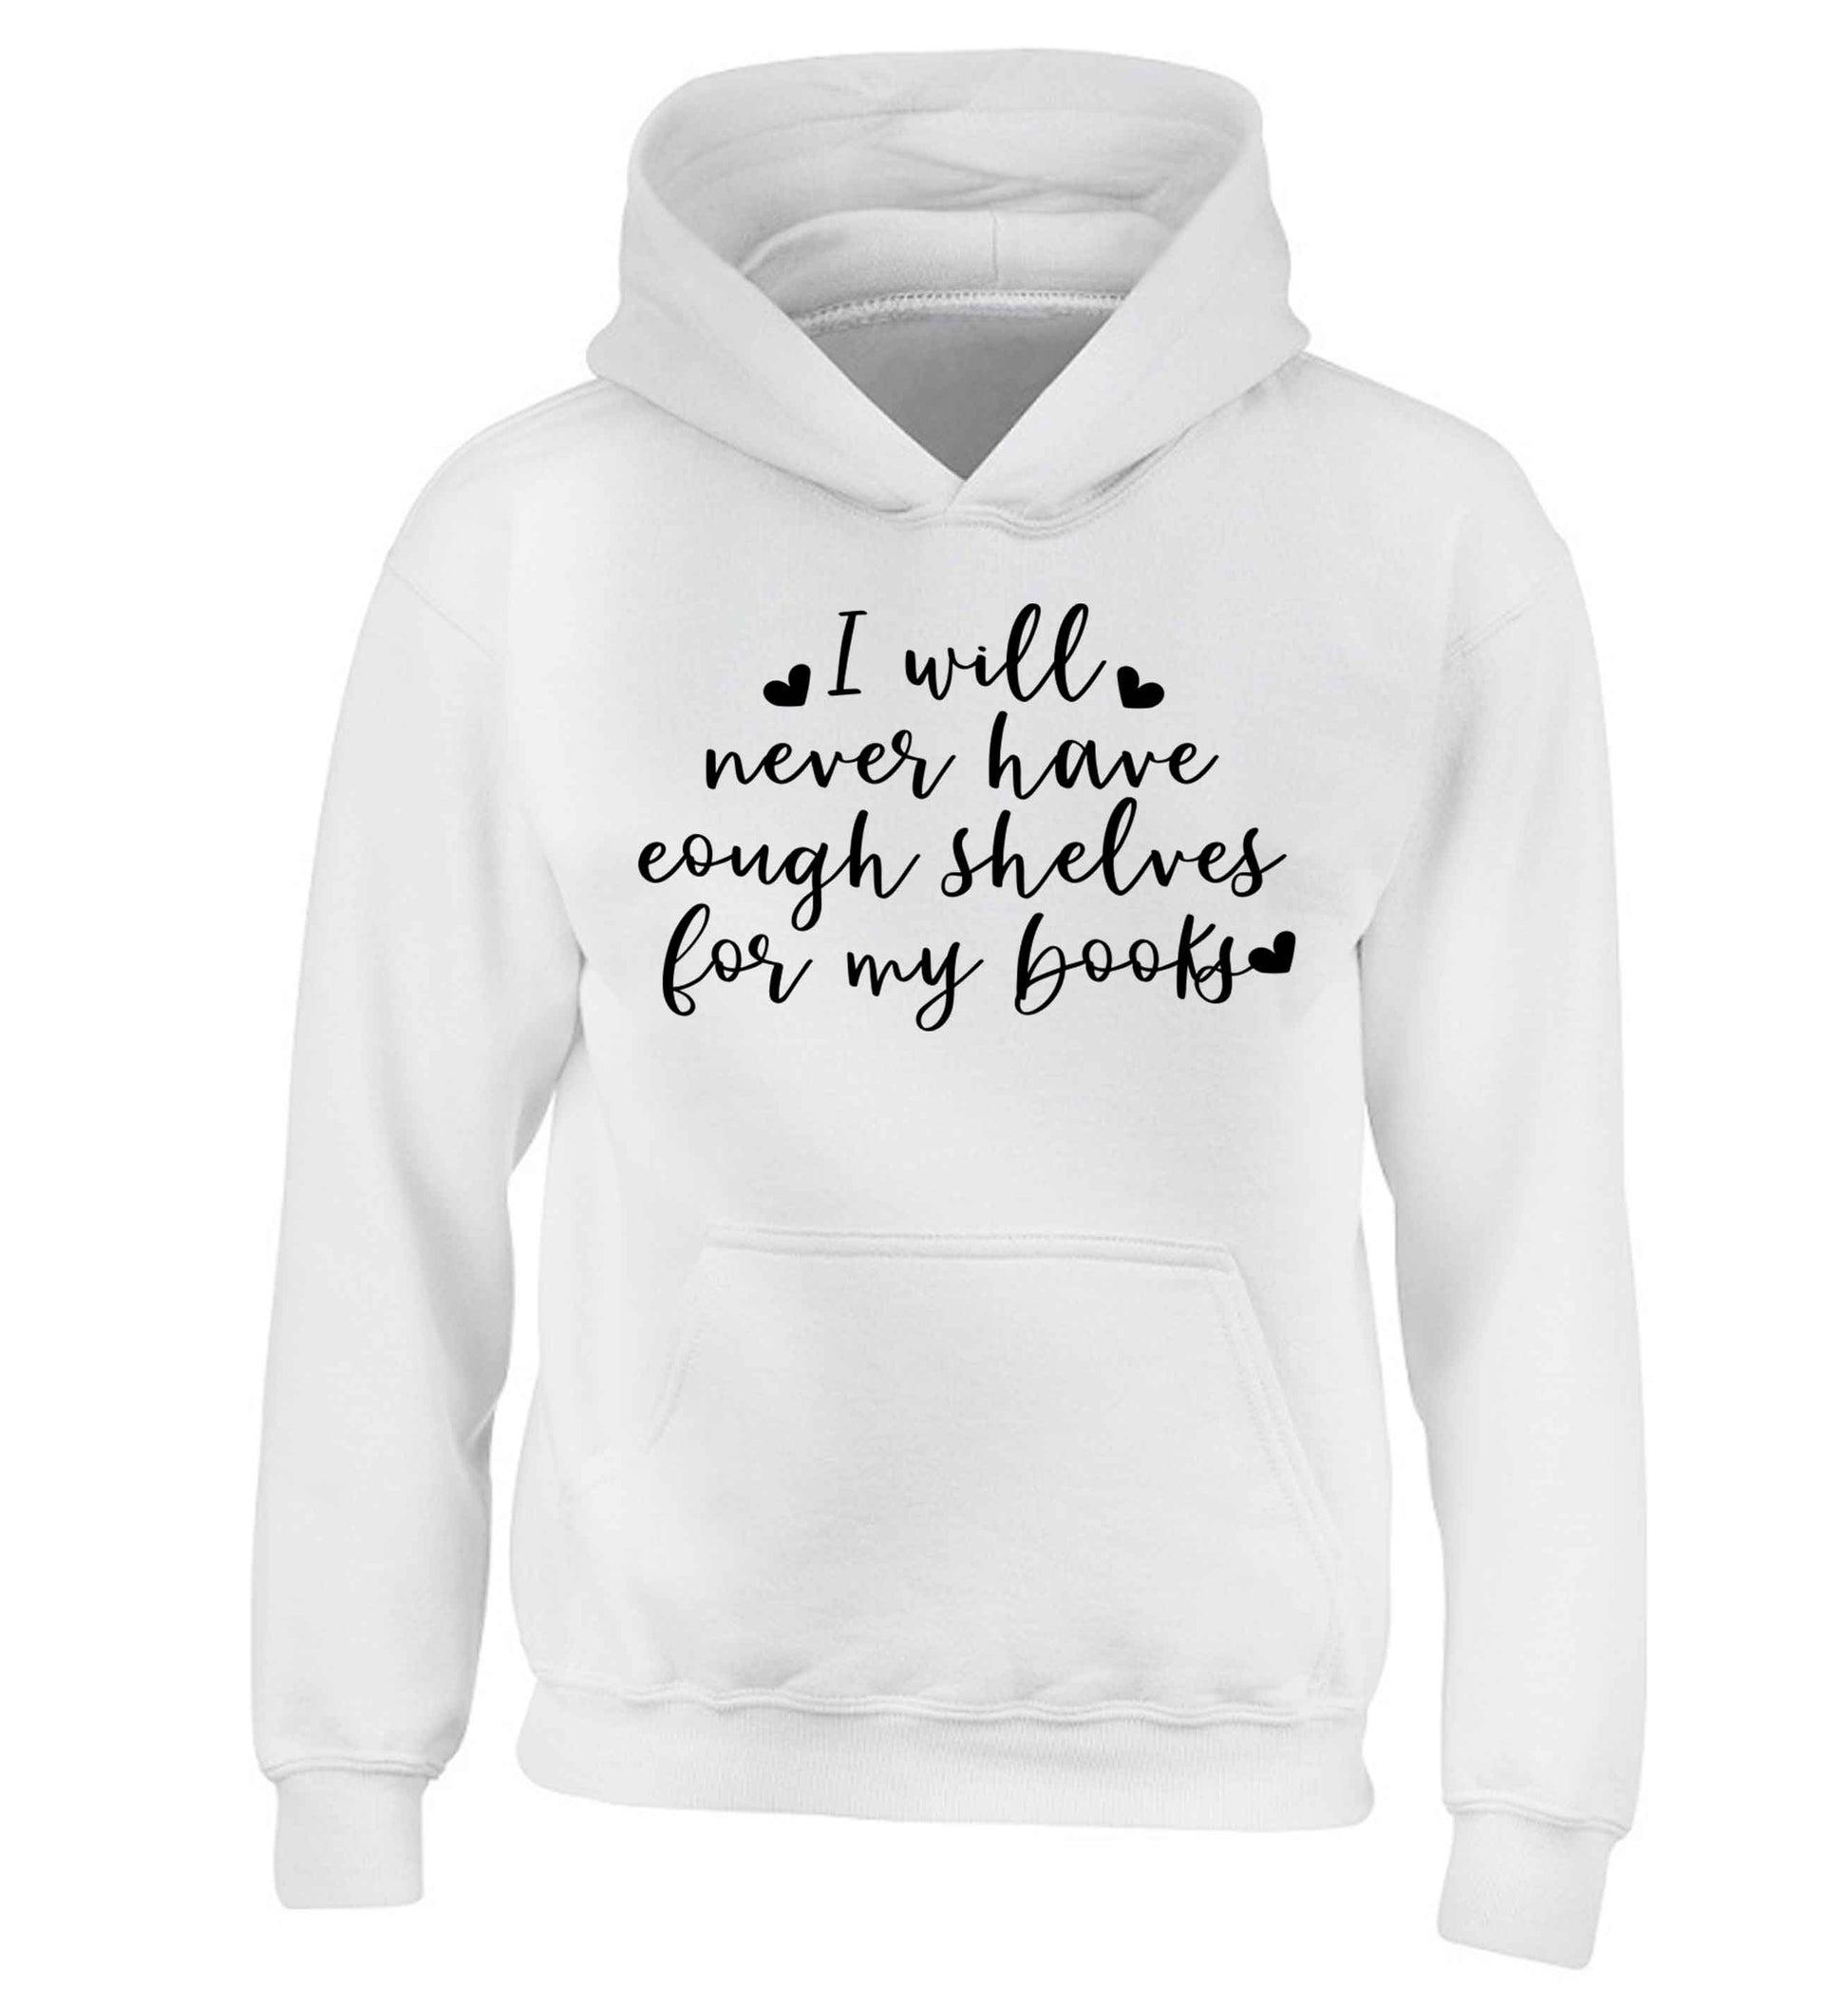 I will never have enough shelves for my books children's white hoodie 12-13 Years